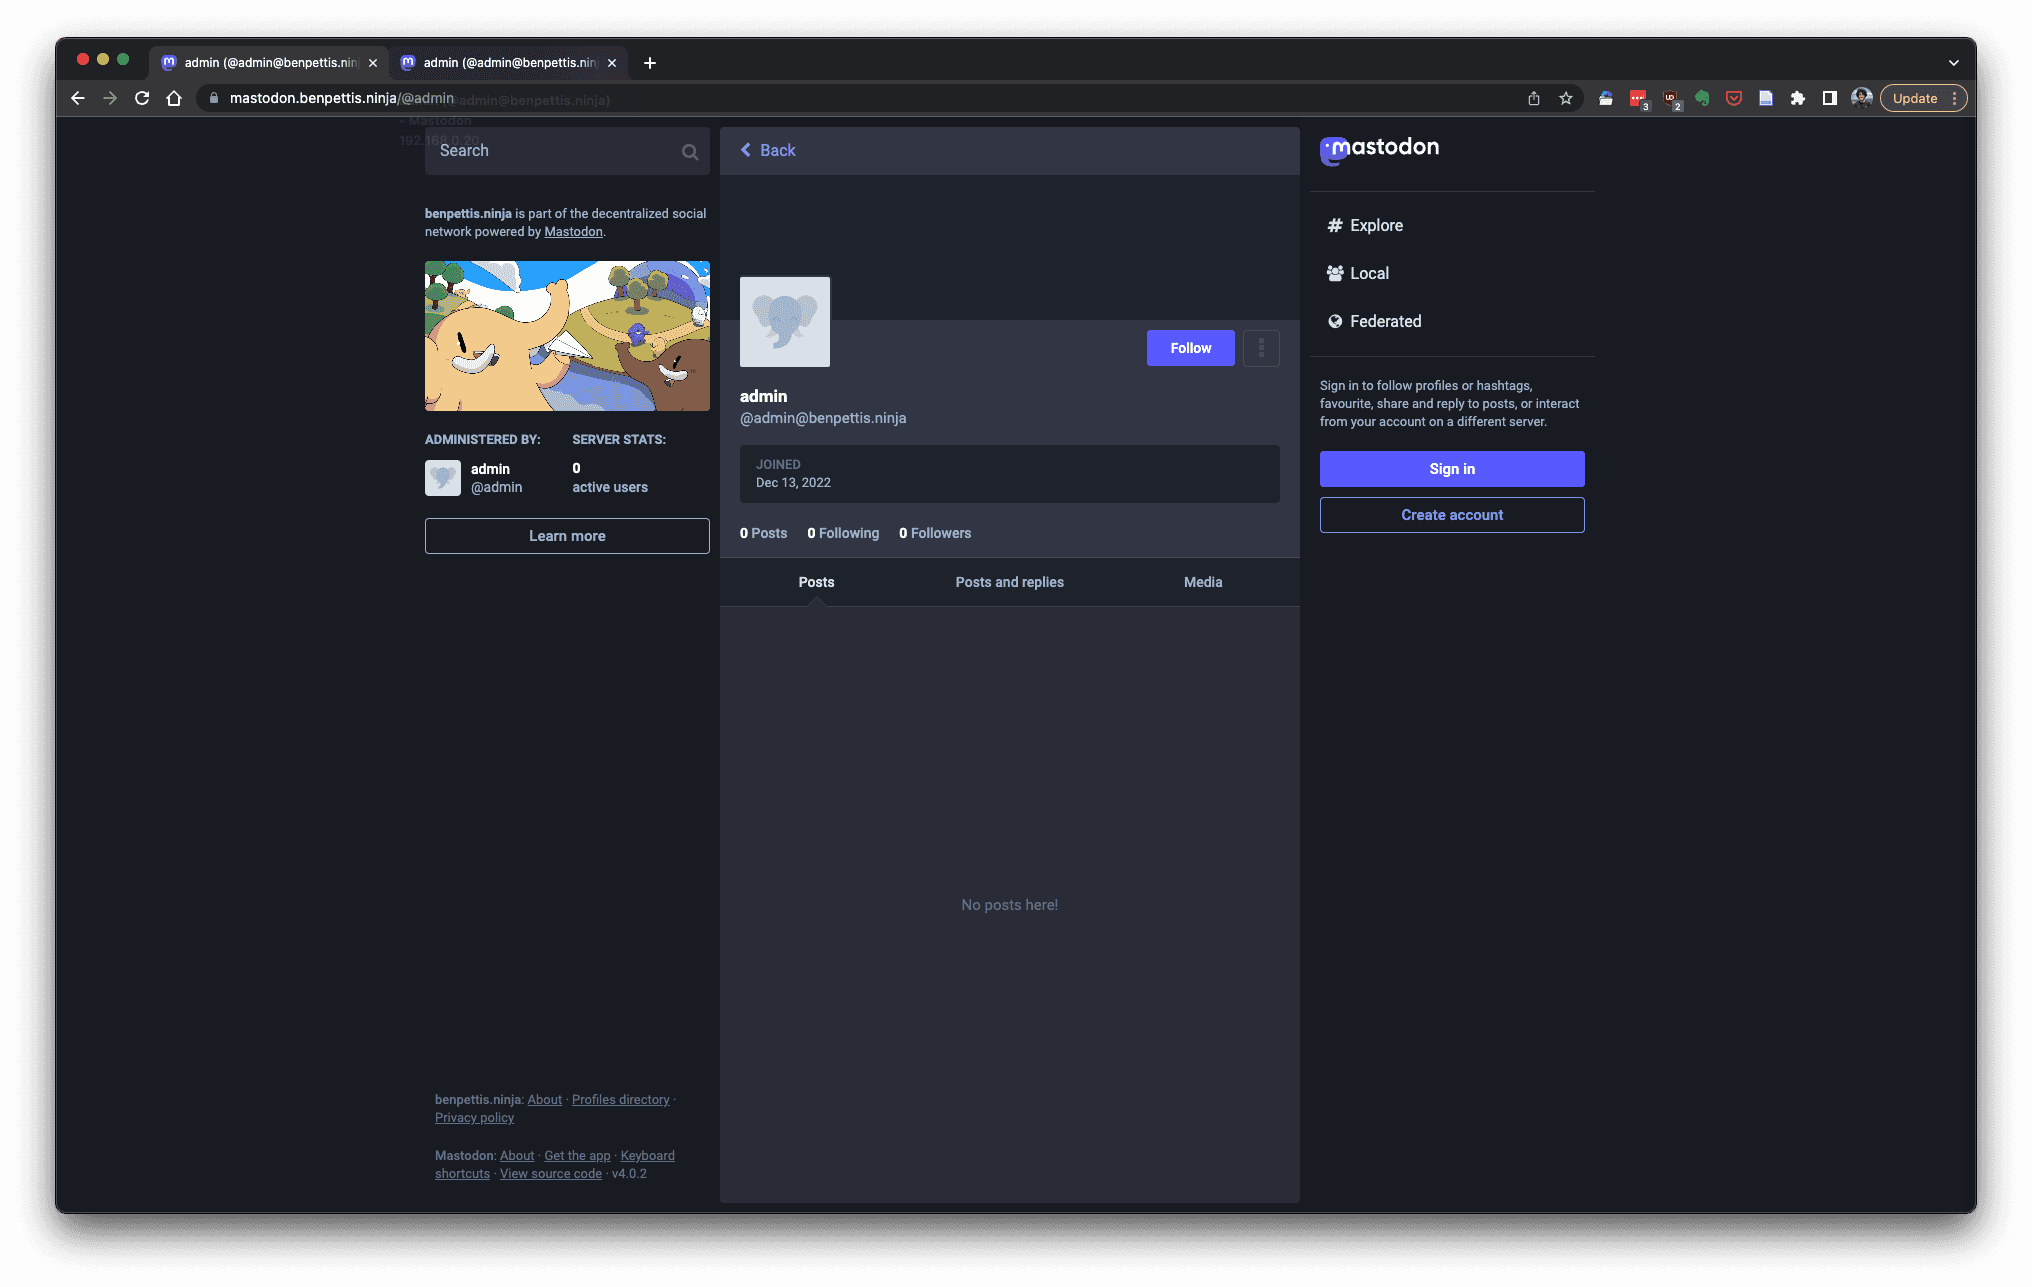 A screenshot of a blank default Mastodon interface. All images are now displaying properly on the page.